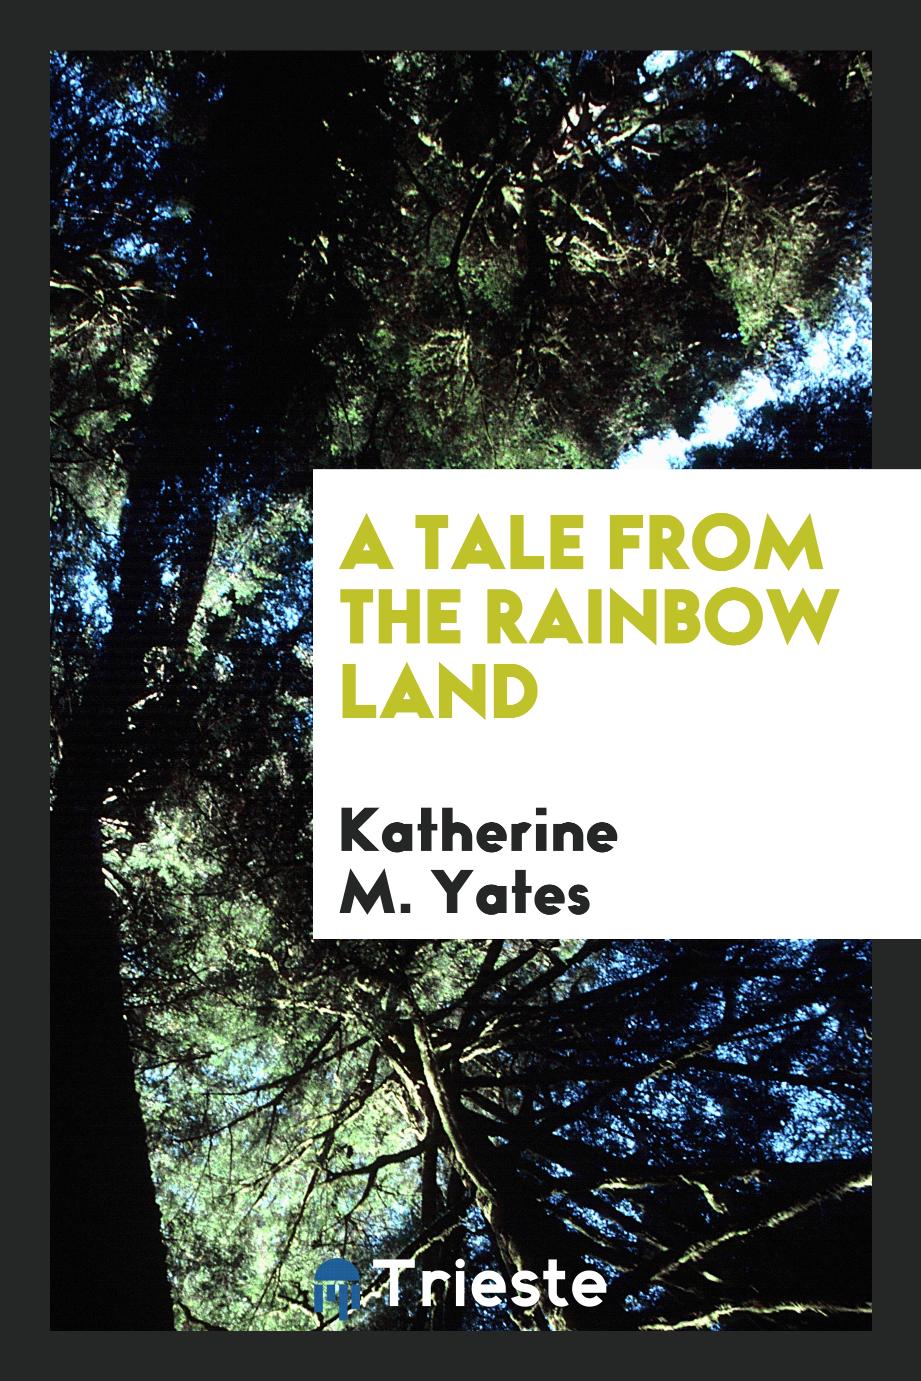 A Tale from the Rainbow Land